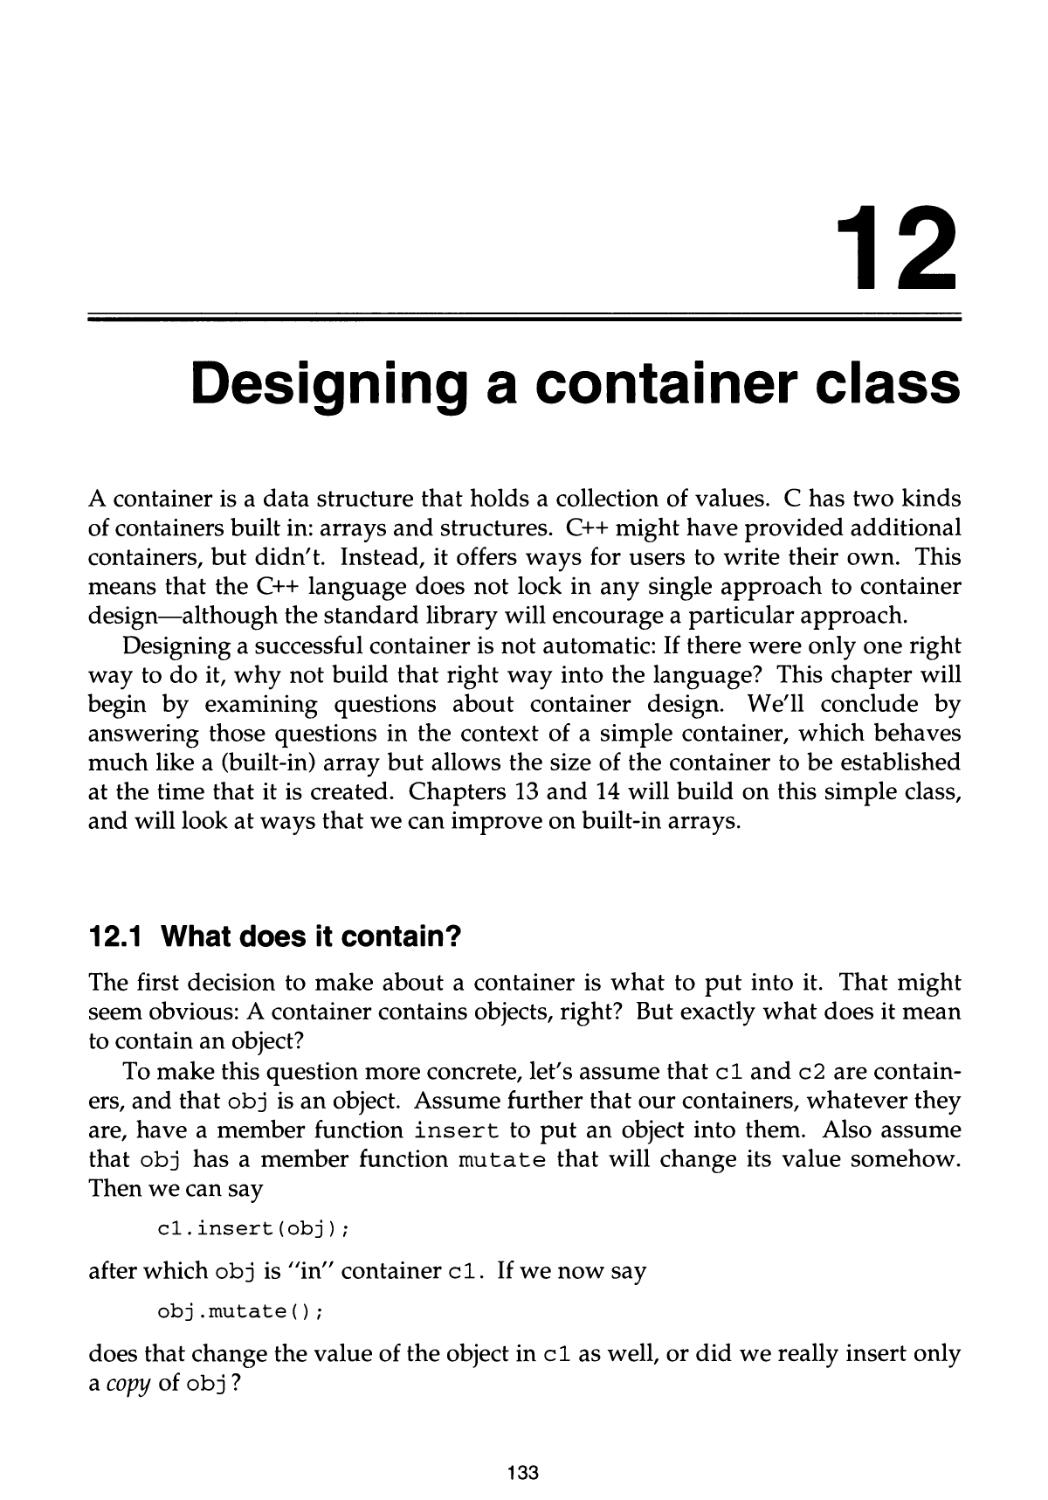 12.2 What does copying the container mean?